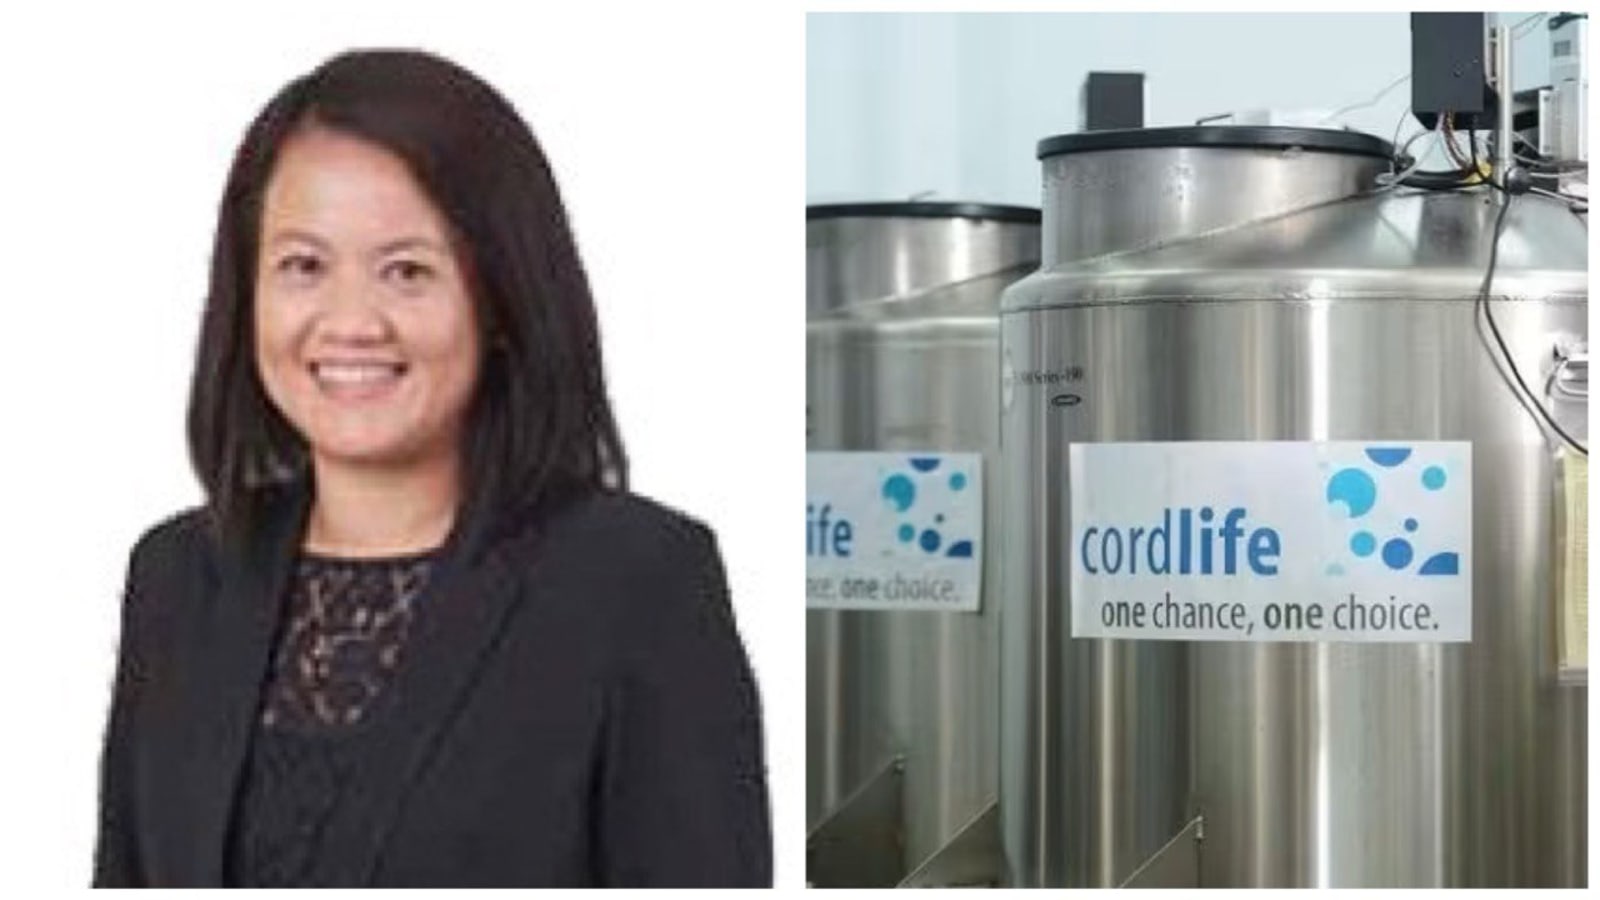 Cordlife probe: Chief financial officer arrested, released on bail